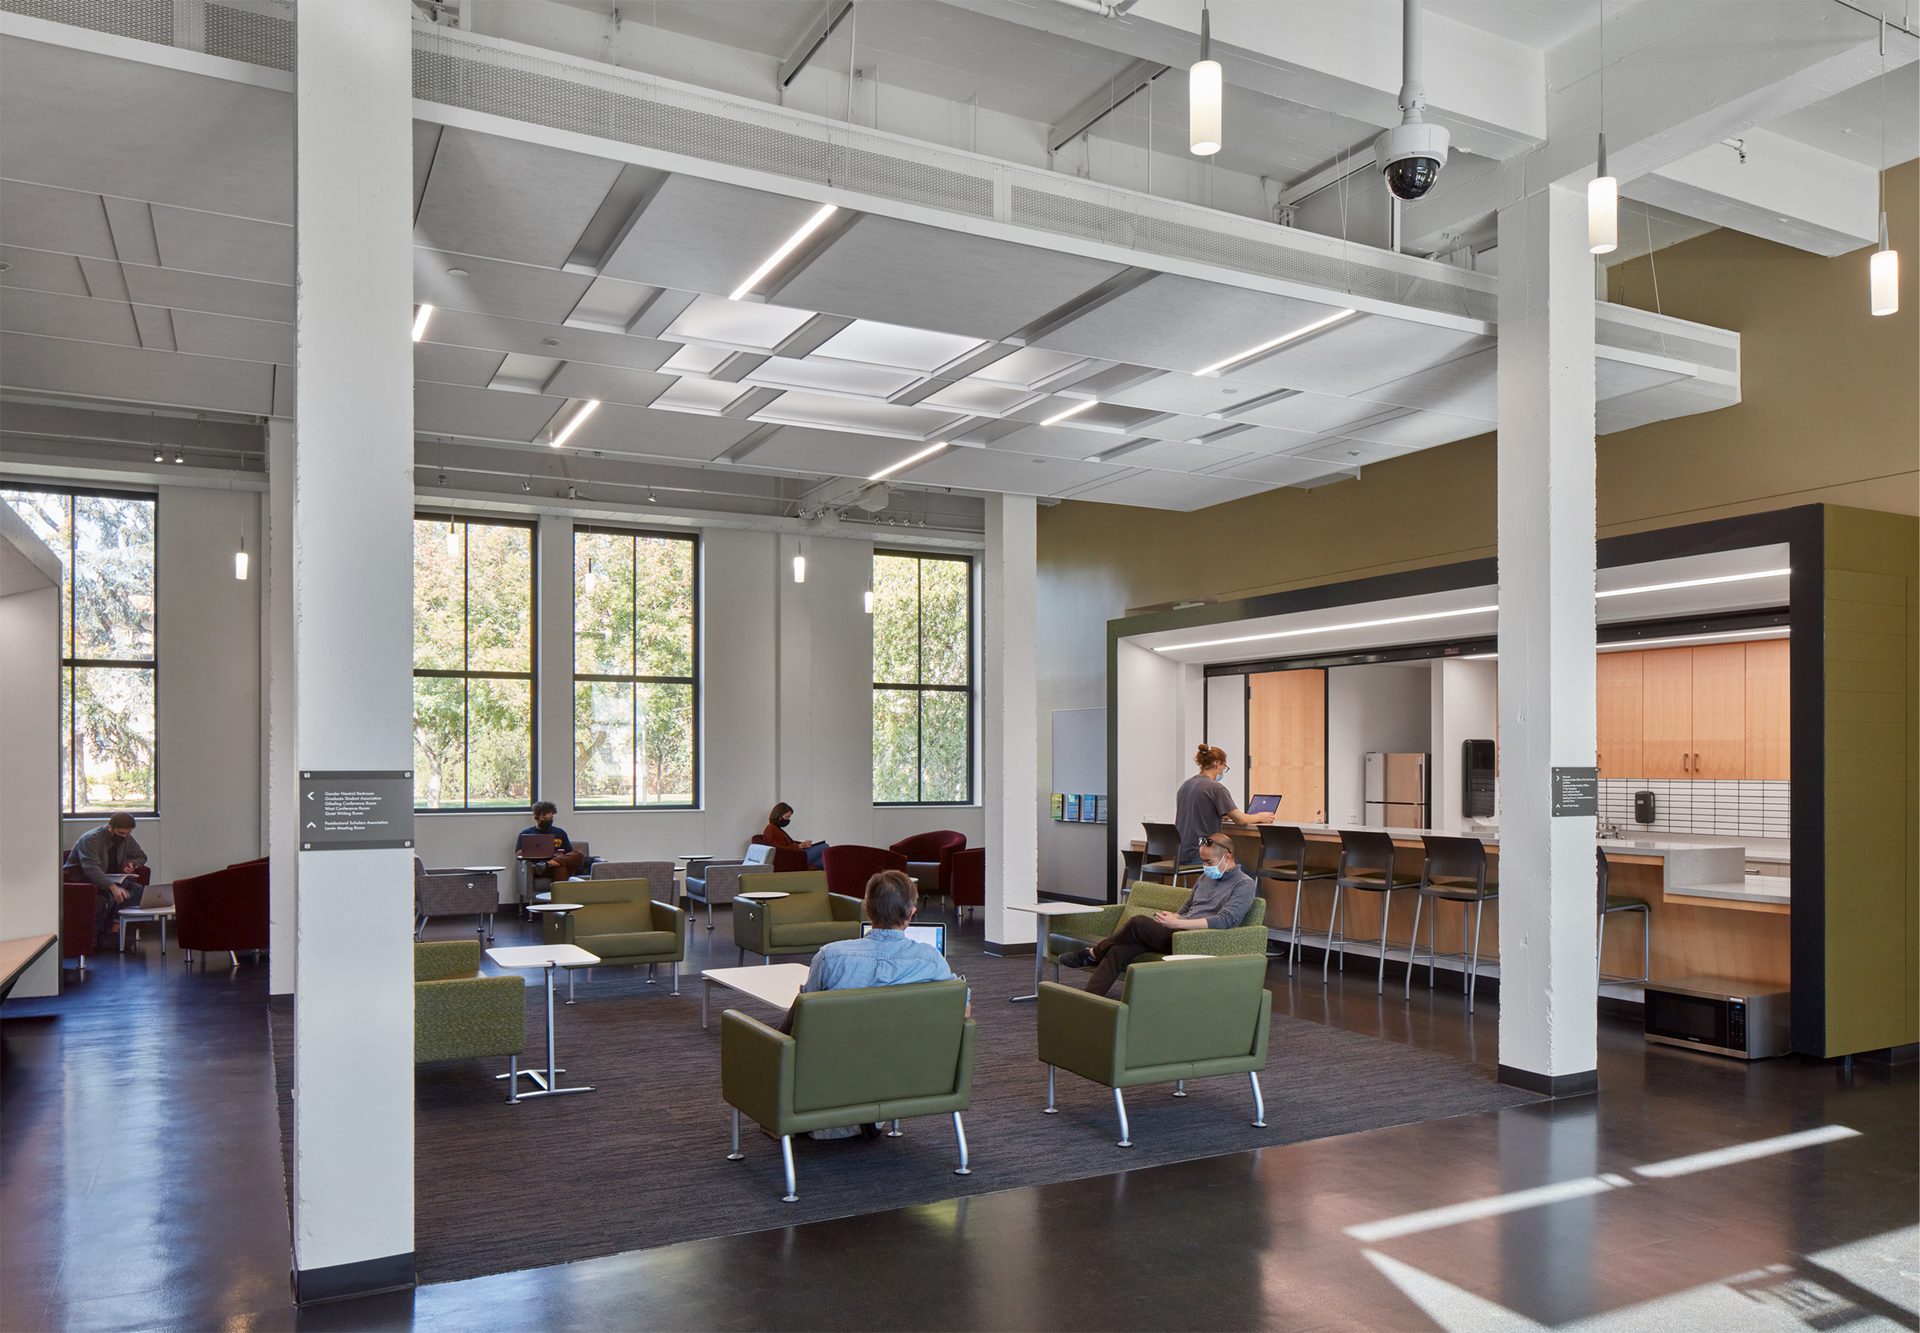 University graduate center lounge interior with staggered modern white ceiling system.